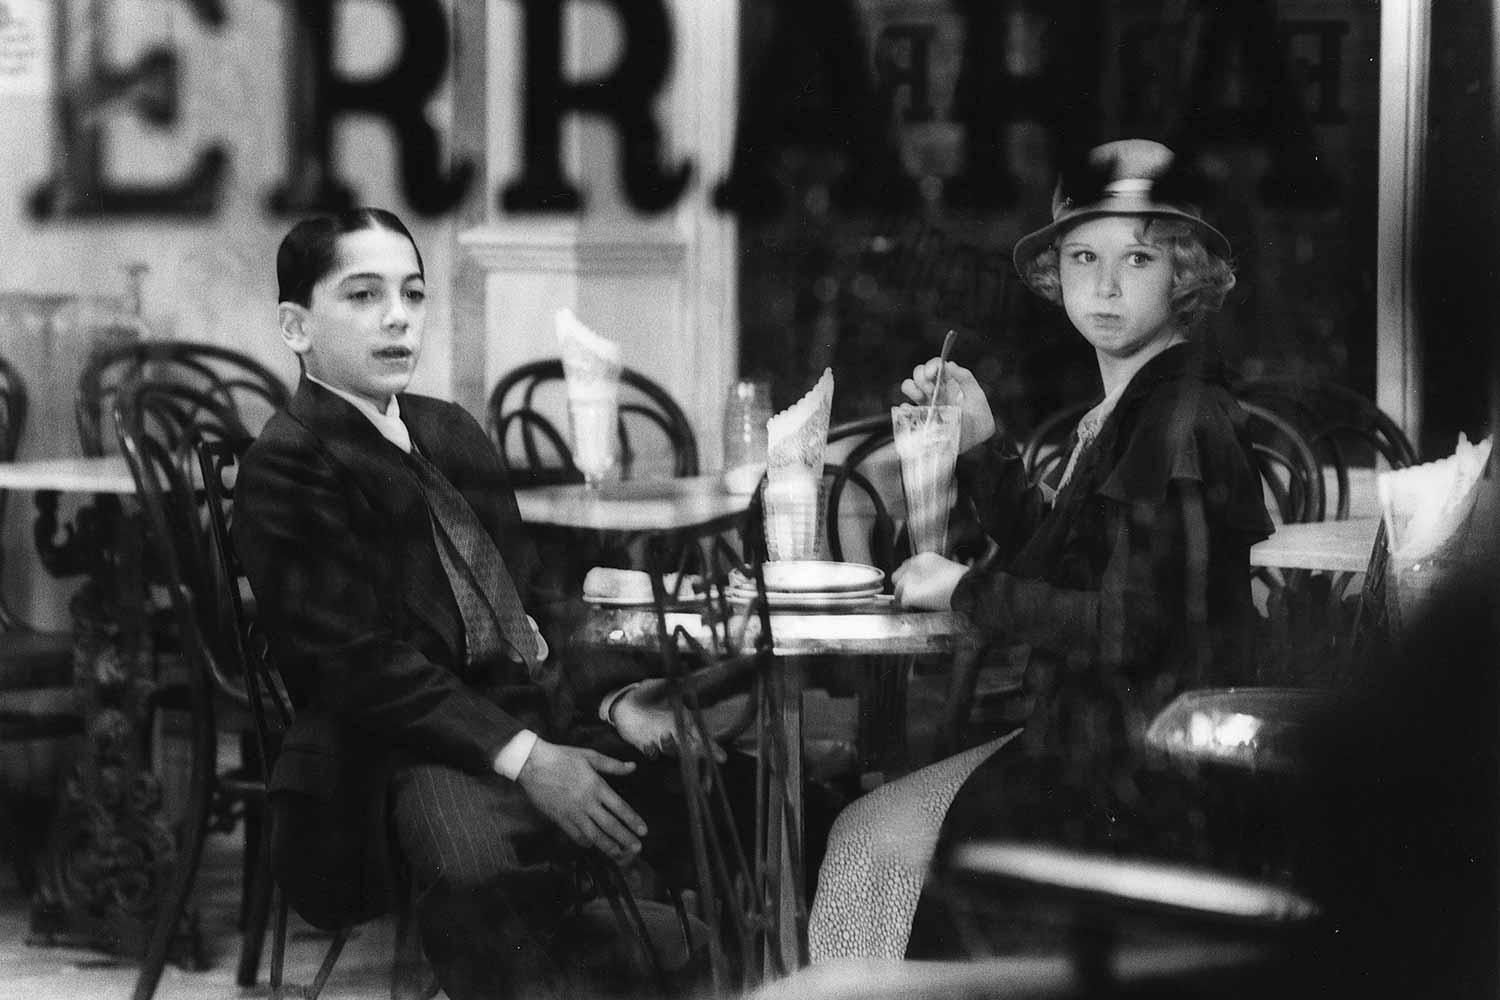 Scott Baio and Florrie Dugger in a scene from Bugsy Malone